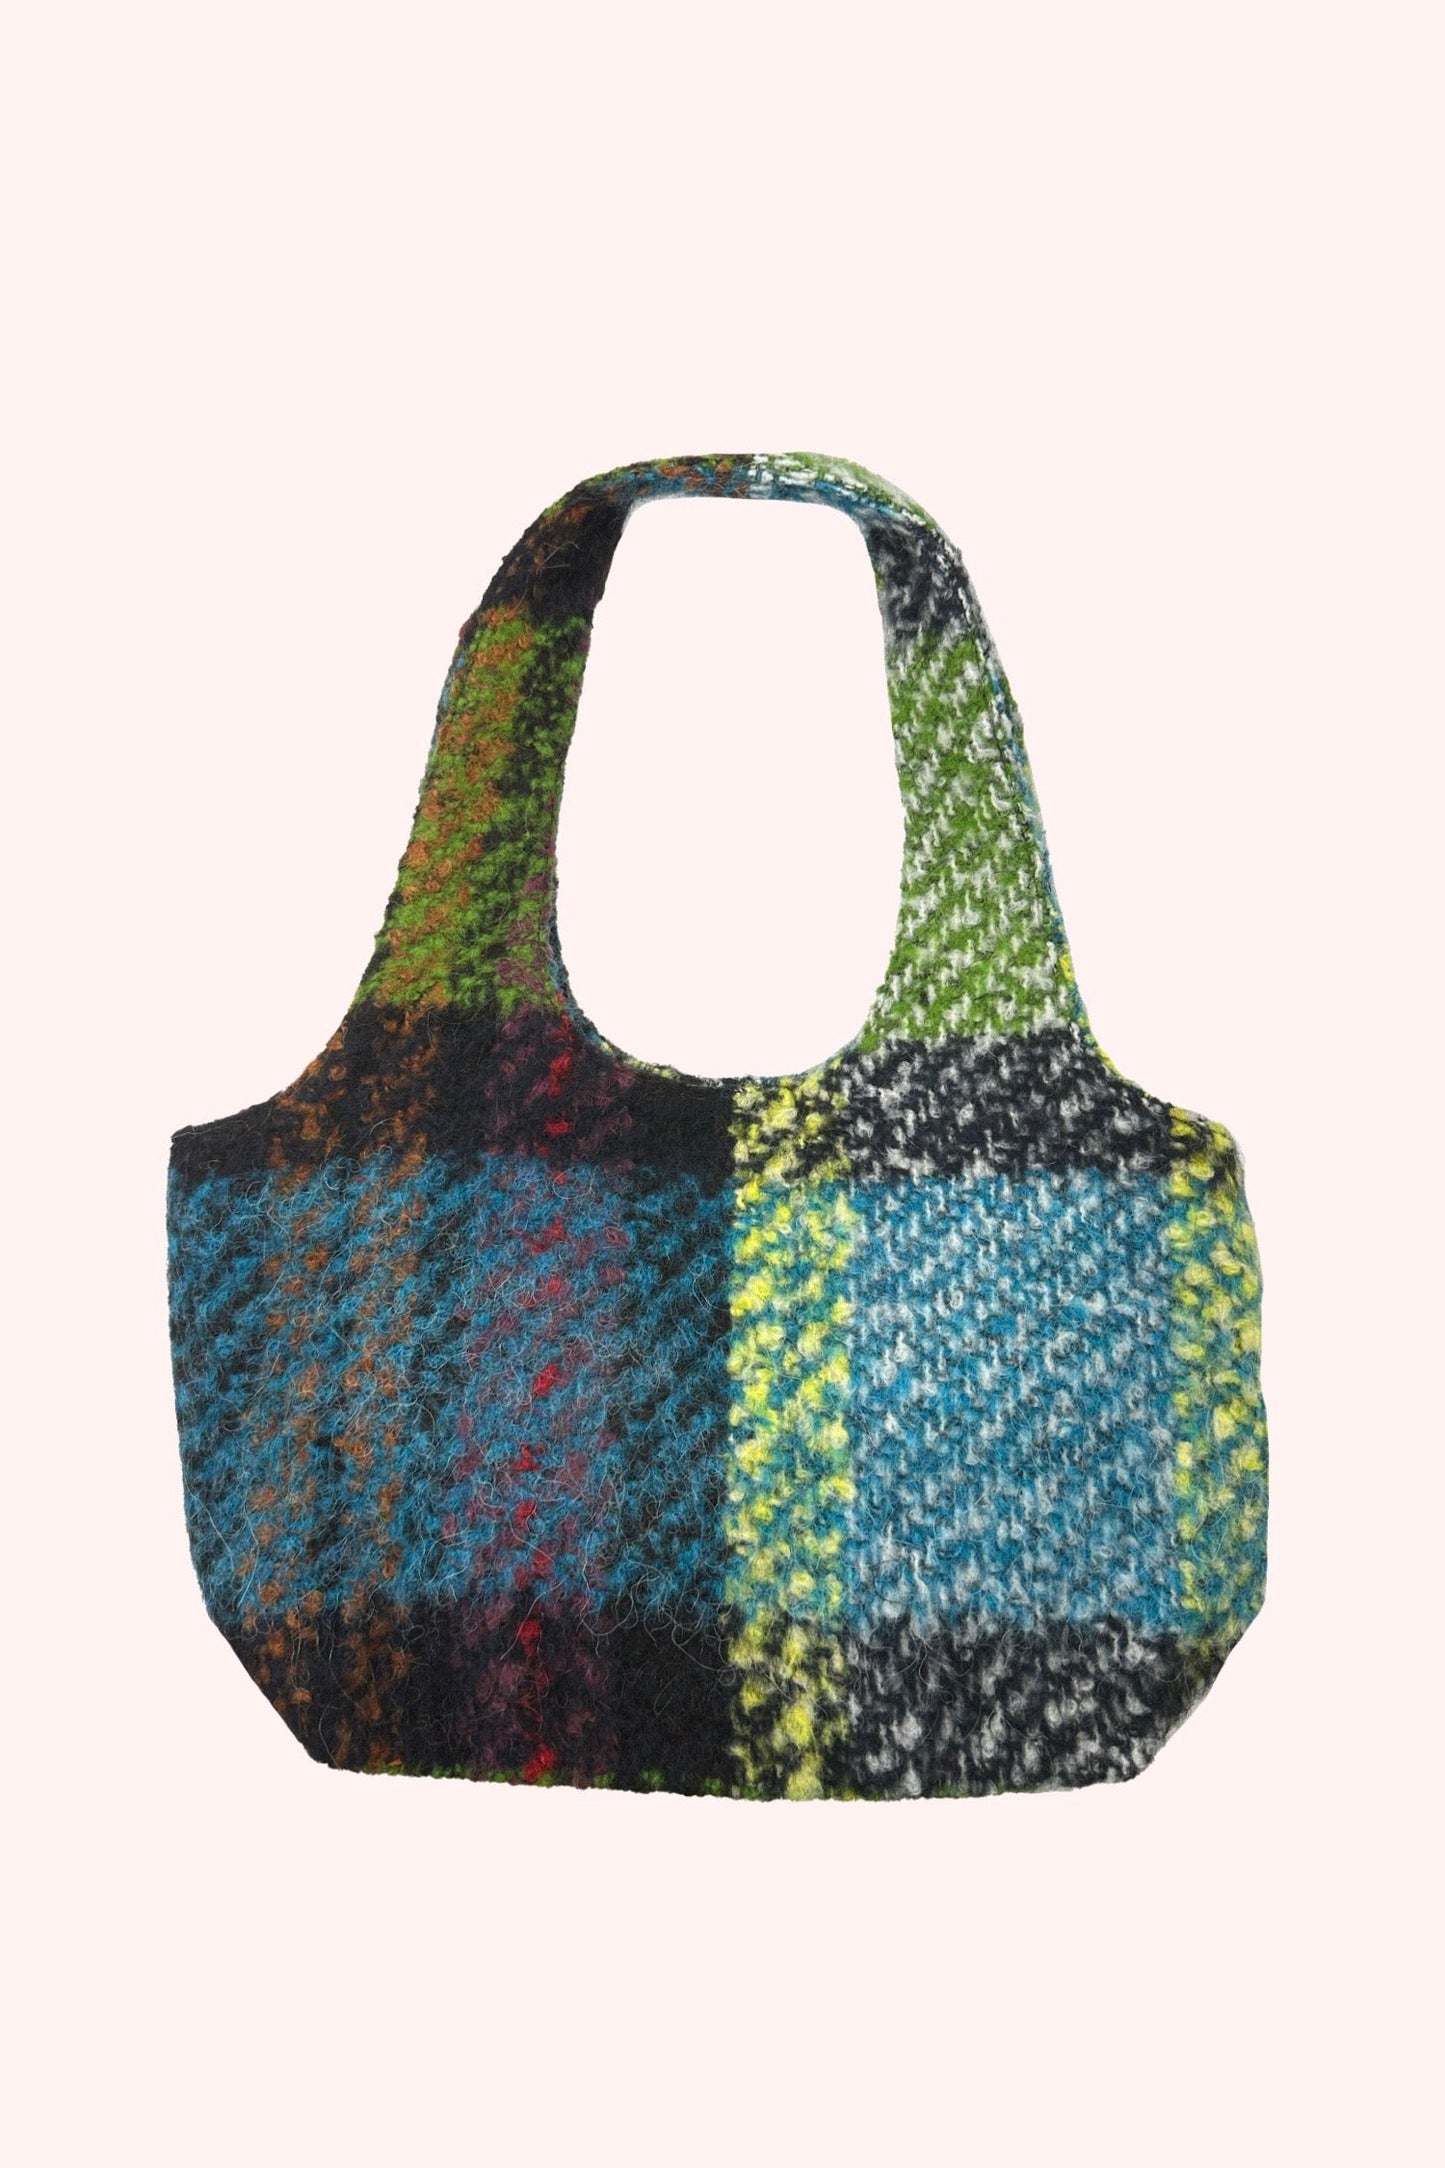 Mini Bag Fern, trapezoidal-shaped, handle incorporated to the bag body, plaid from green to blue